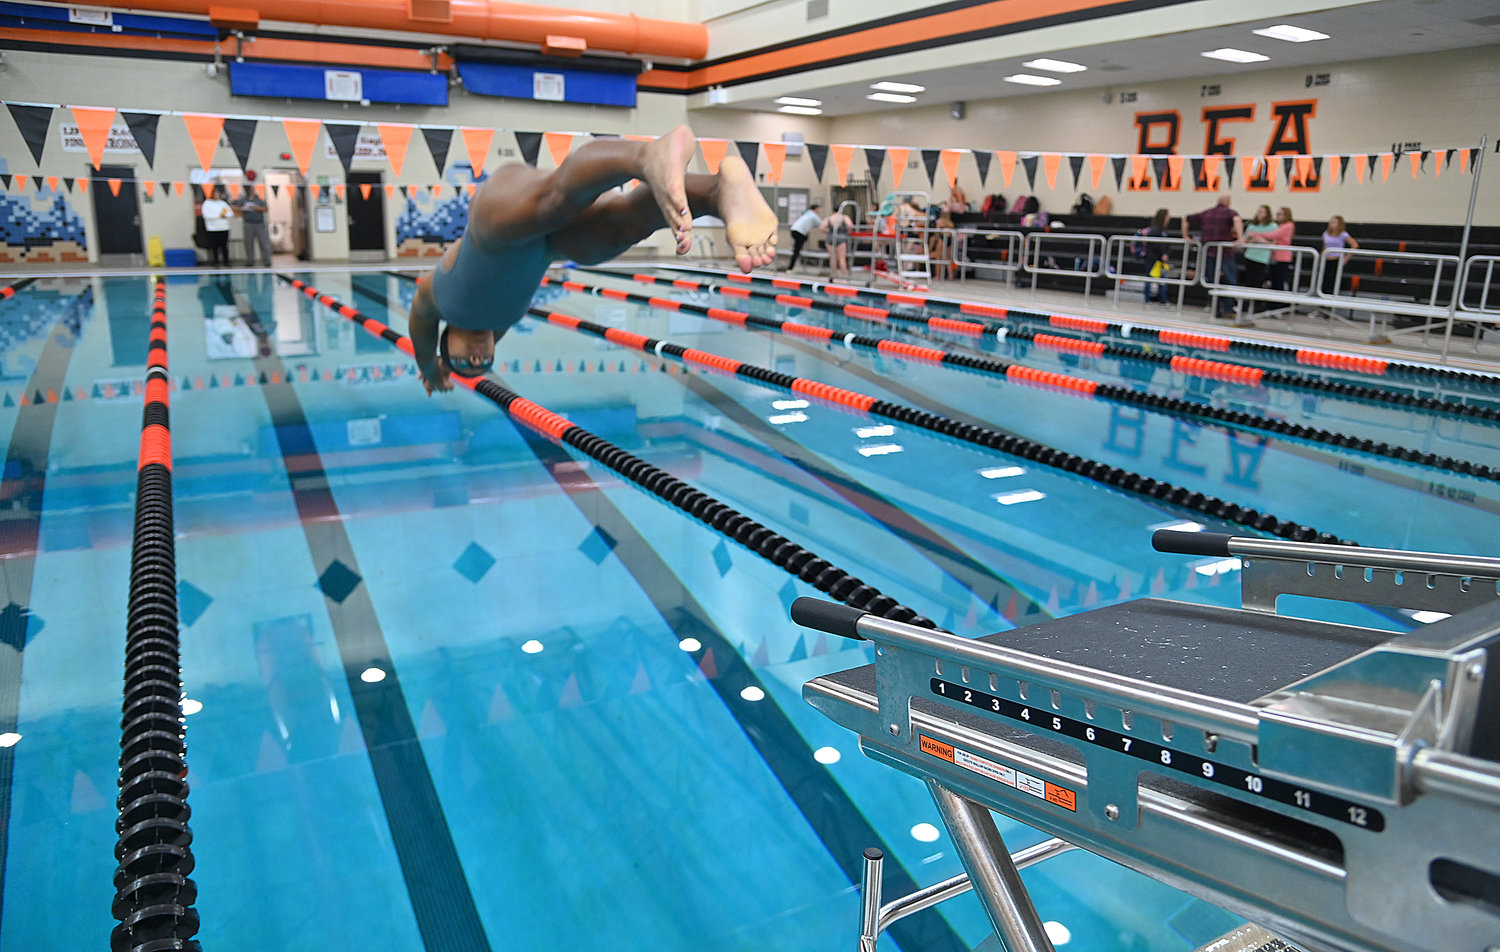 Rome Free Academy swimmer Imani Pugh dives in the pool on the new starting blocks Wednesday at RFA high school.